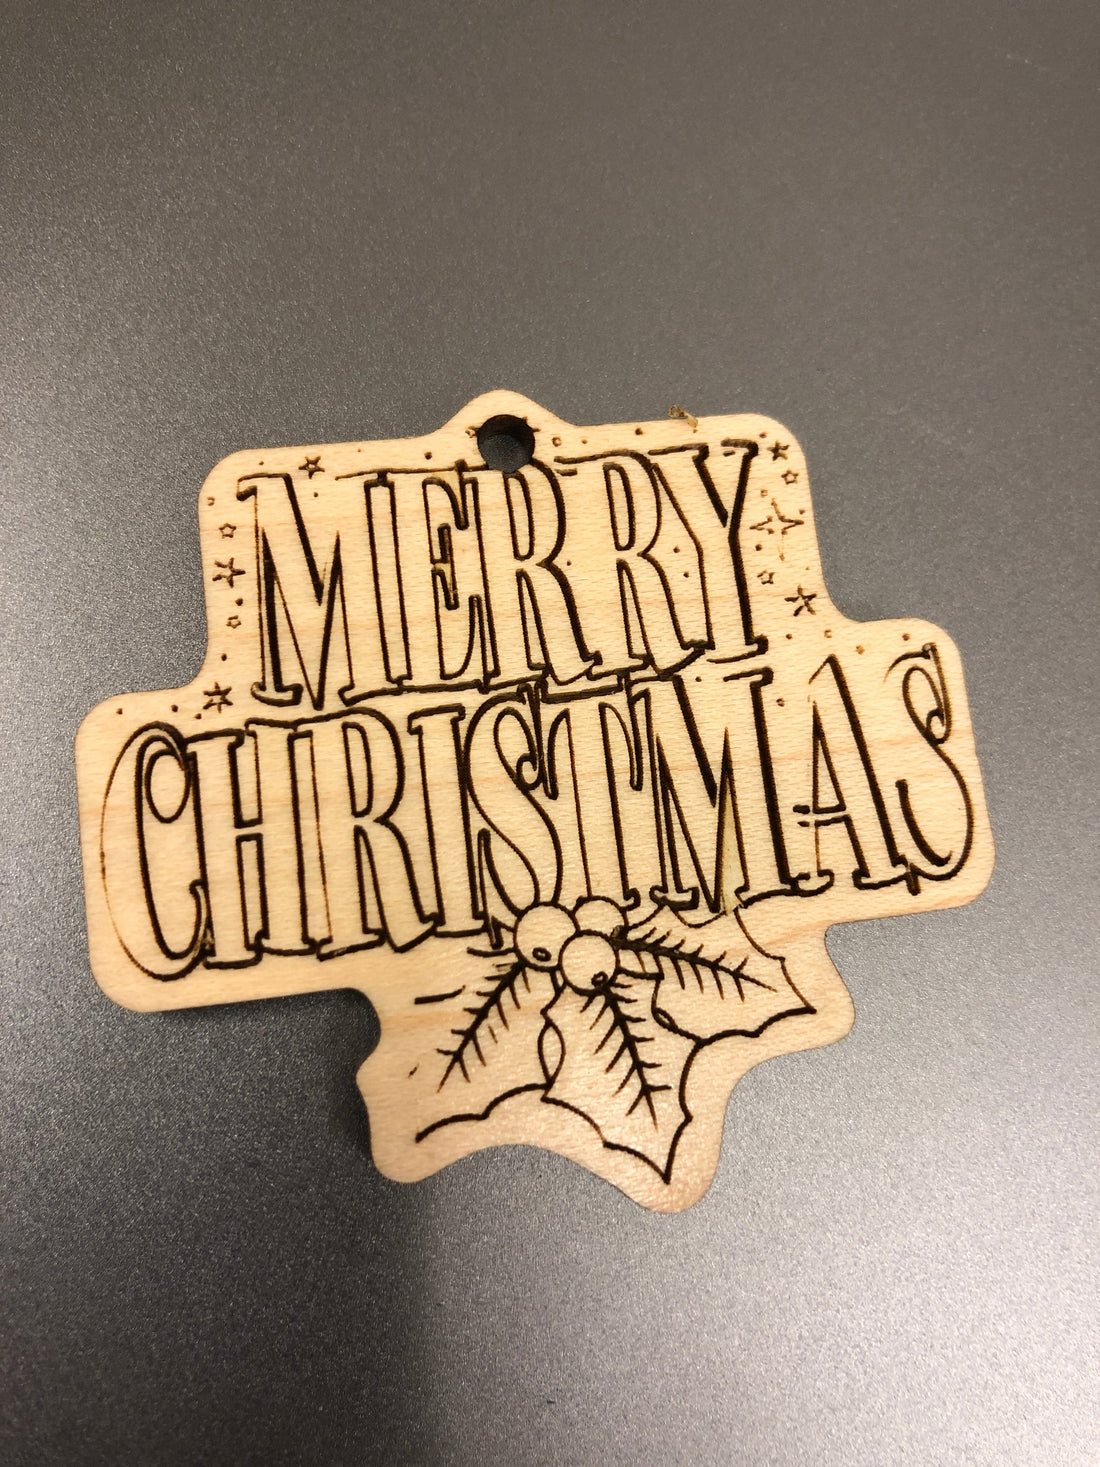 Top 10 Laser Cut Christmas Gift Ideas for 2023 - Makers Workshop